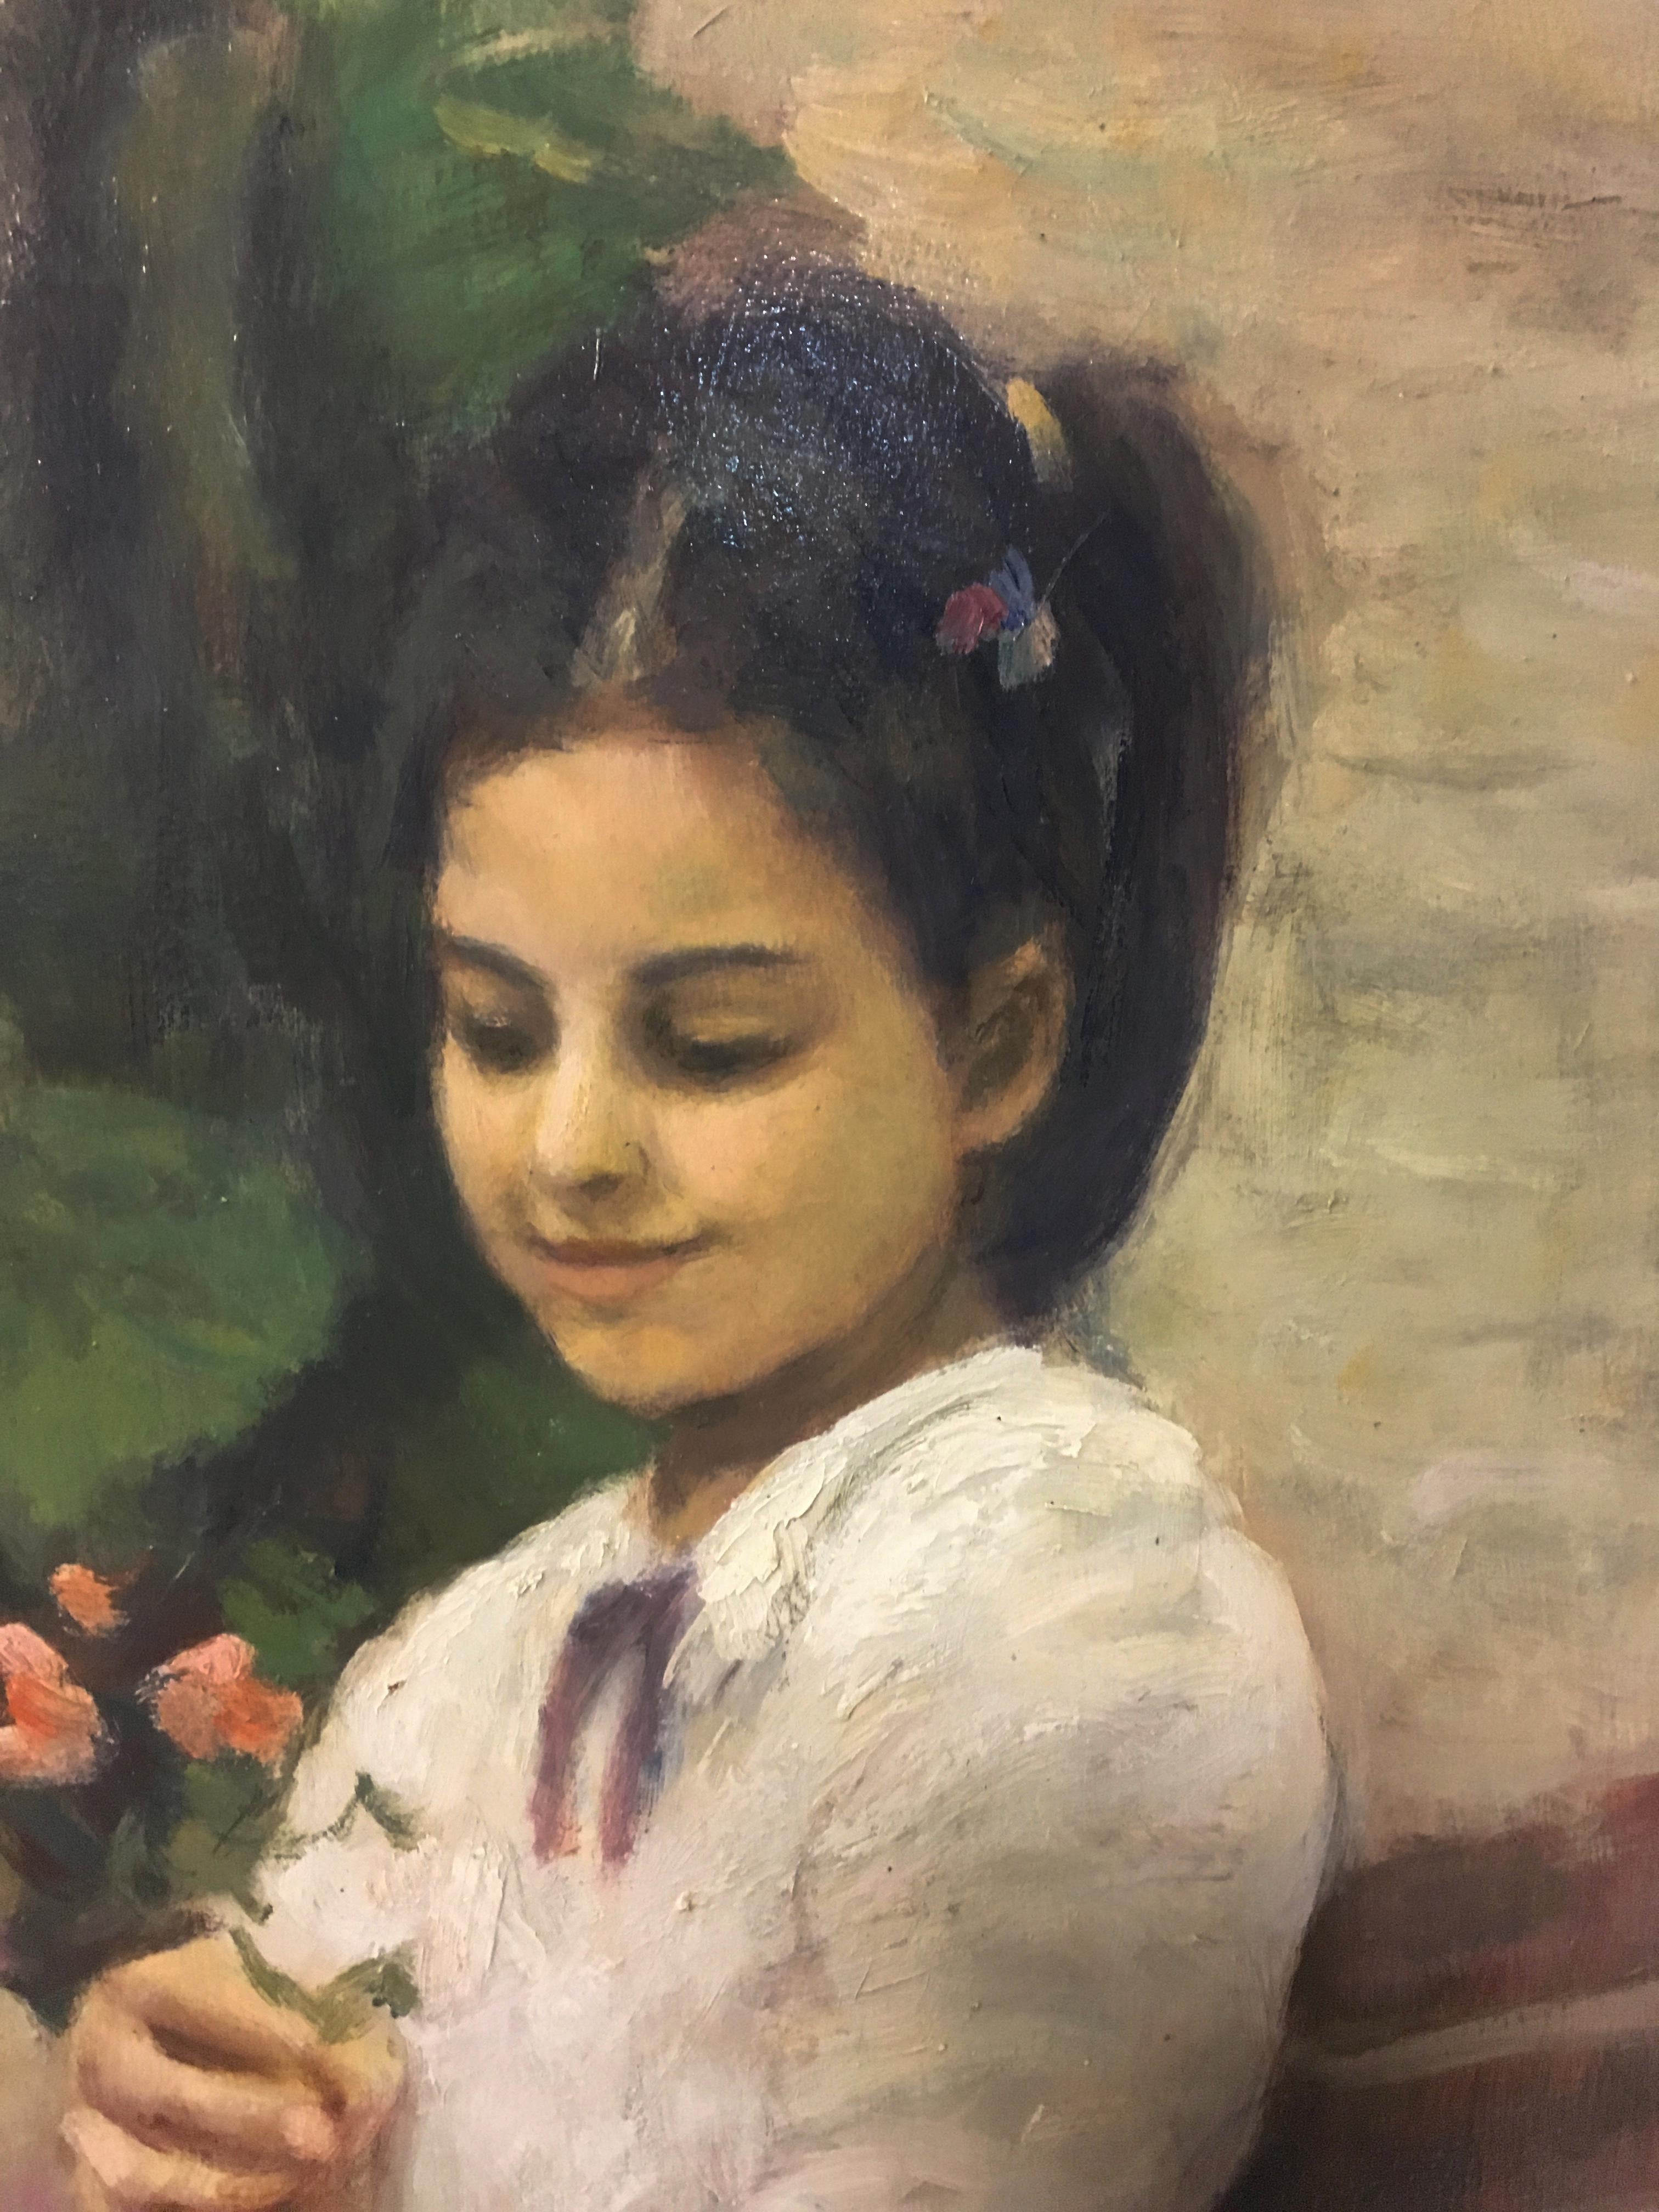 CHILD - Oil on canvas cm.70x50, Tonino Manna, Italy 2002
Frame available on request from our workshop.
in this wonderful painting we admire a girl in a white dress who takes care of the flowers on the terrace. The scene expresses a message of